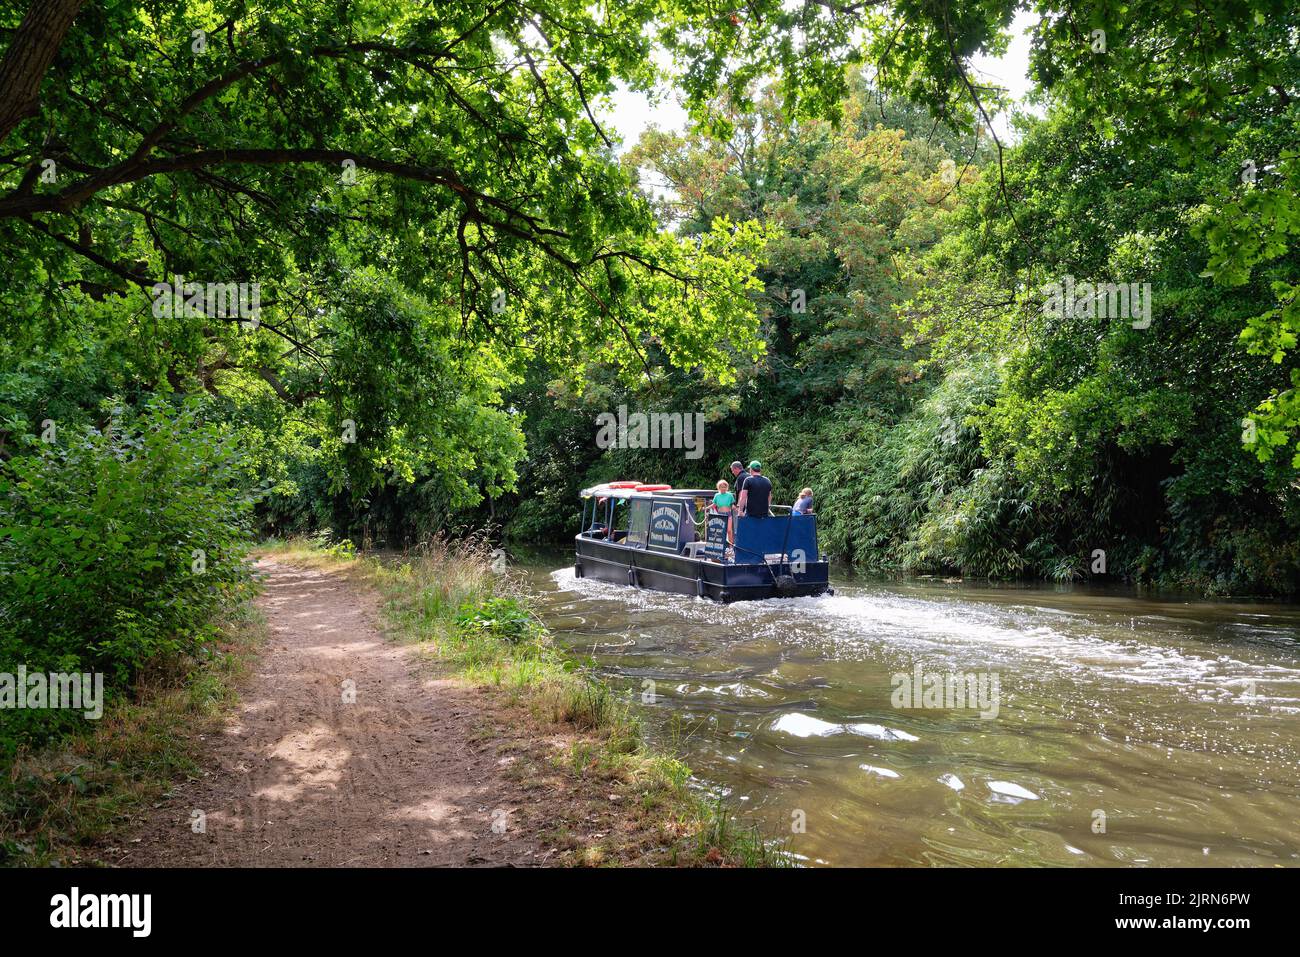 A narrow boat cruising on the River Wey navigation canal on a summers day, Byfleet Surrey England UK Stock Photo